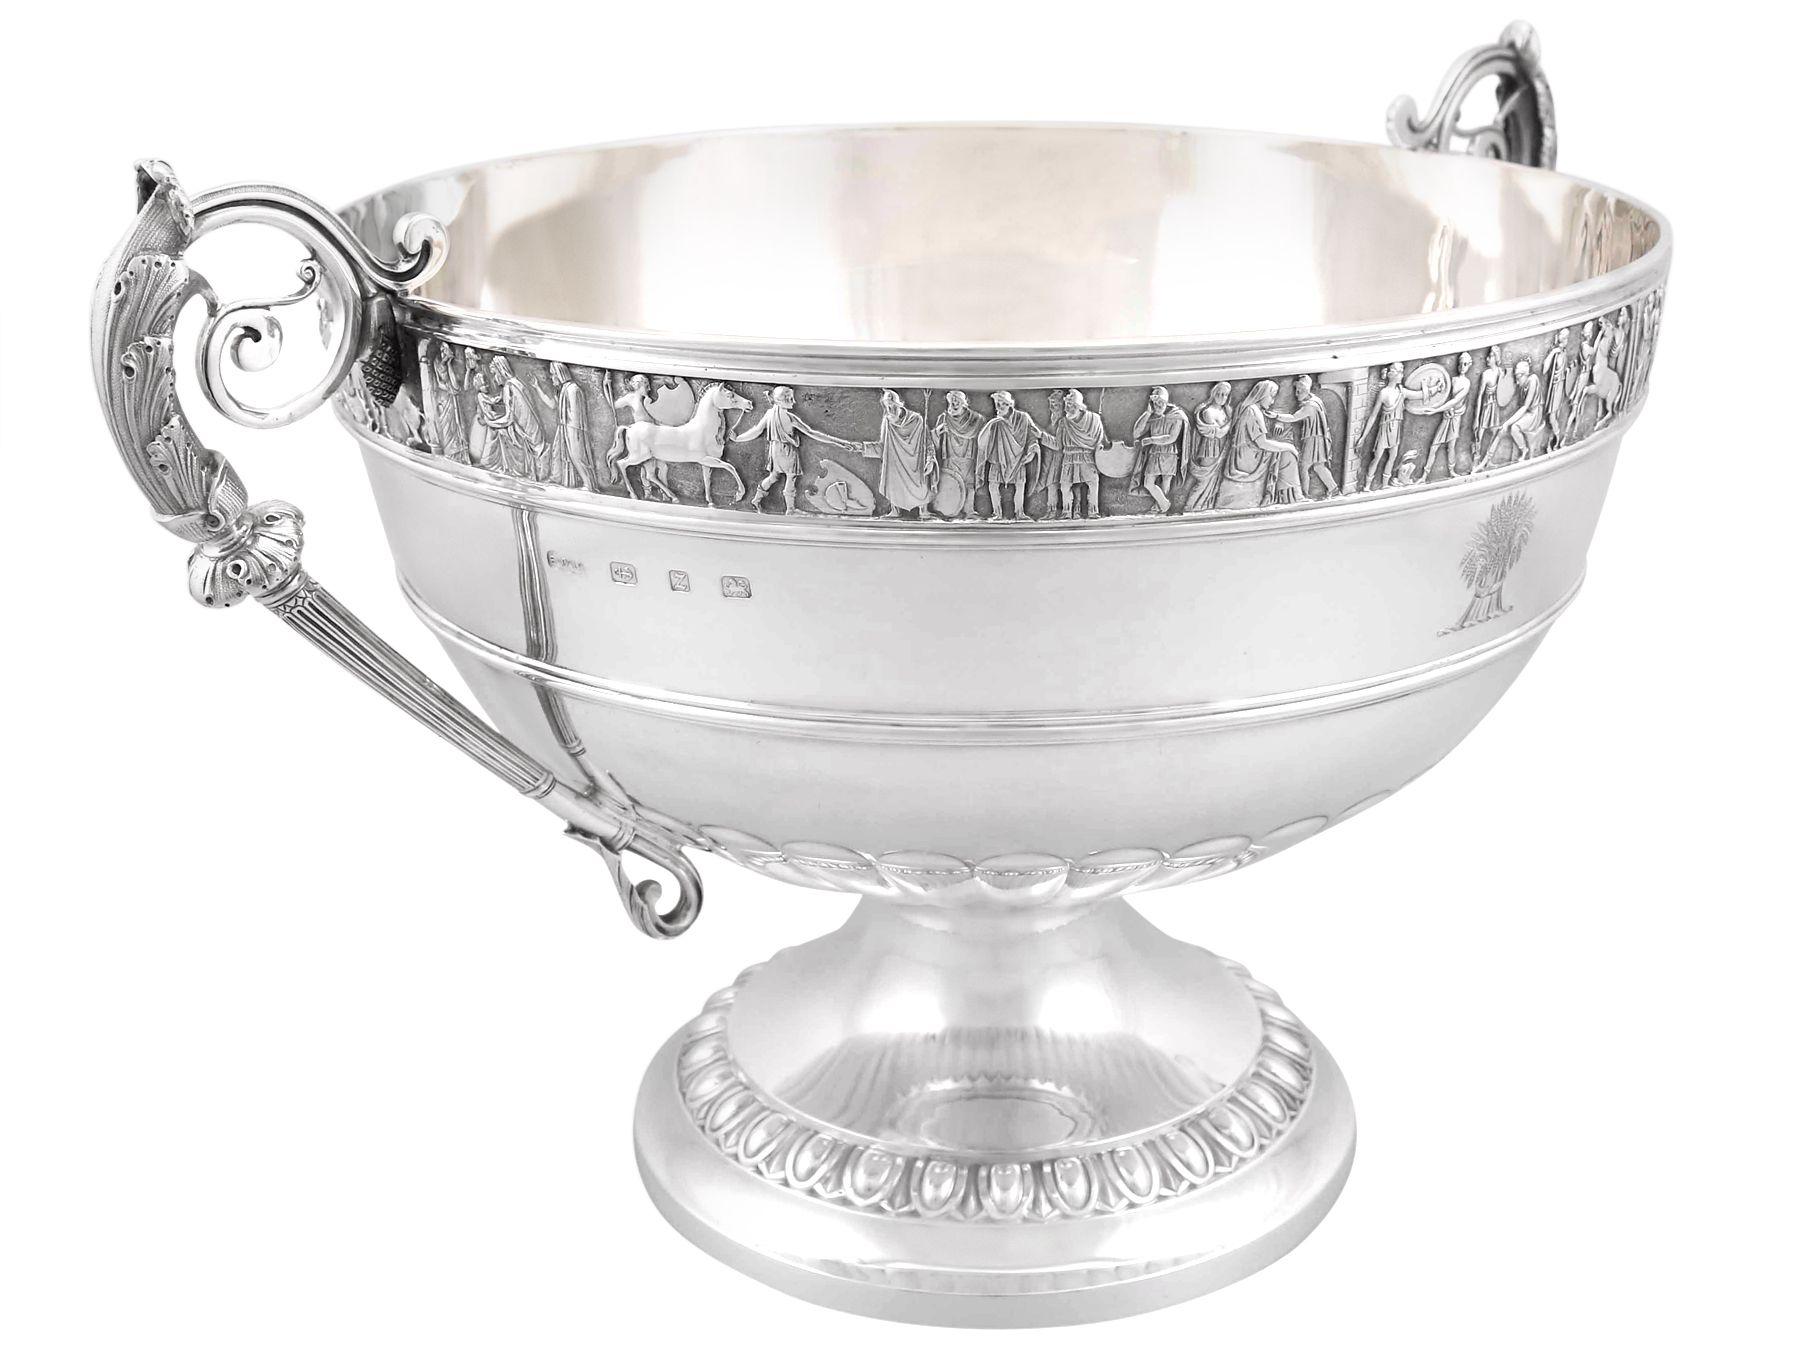 A magnificent, fine and impressive, large Victorian English sterling silver presentation bowl made by Elkington & Co Ltd; an addition to our ornamental silverware collection.

This magnificent Victorian English sterling silver bowl has a circular